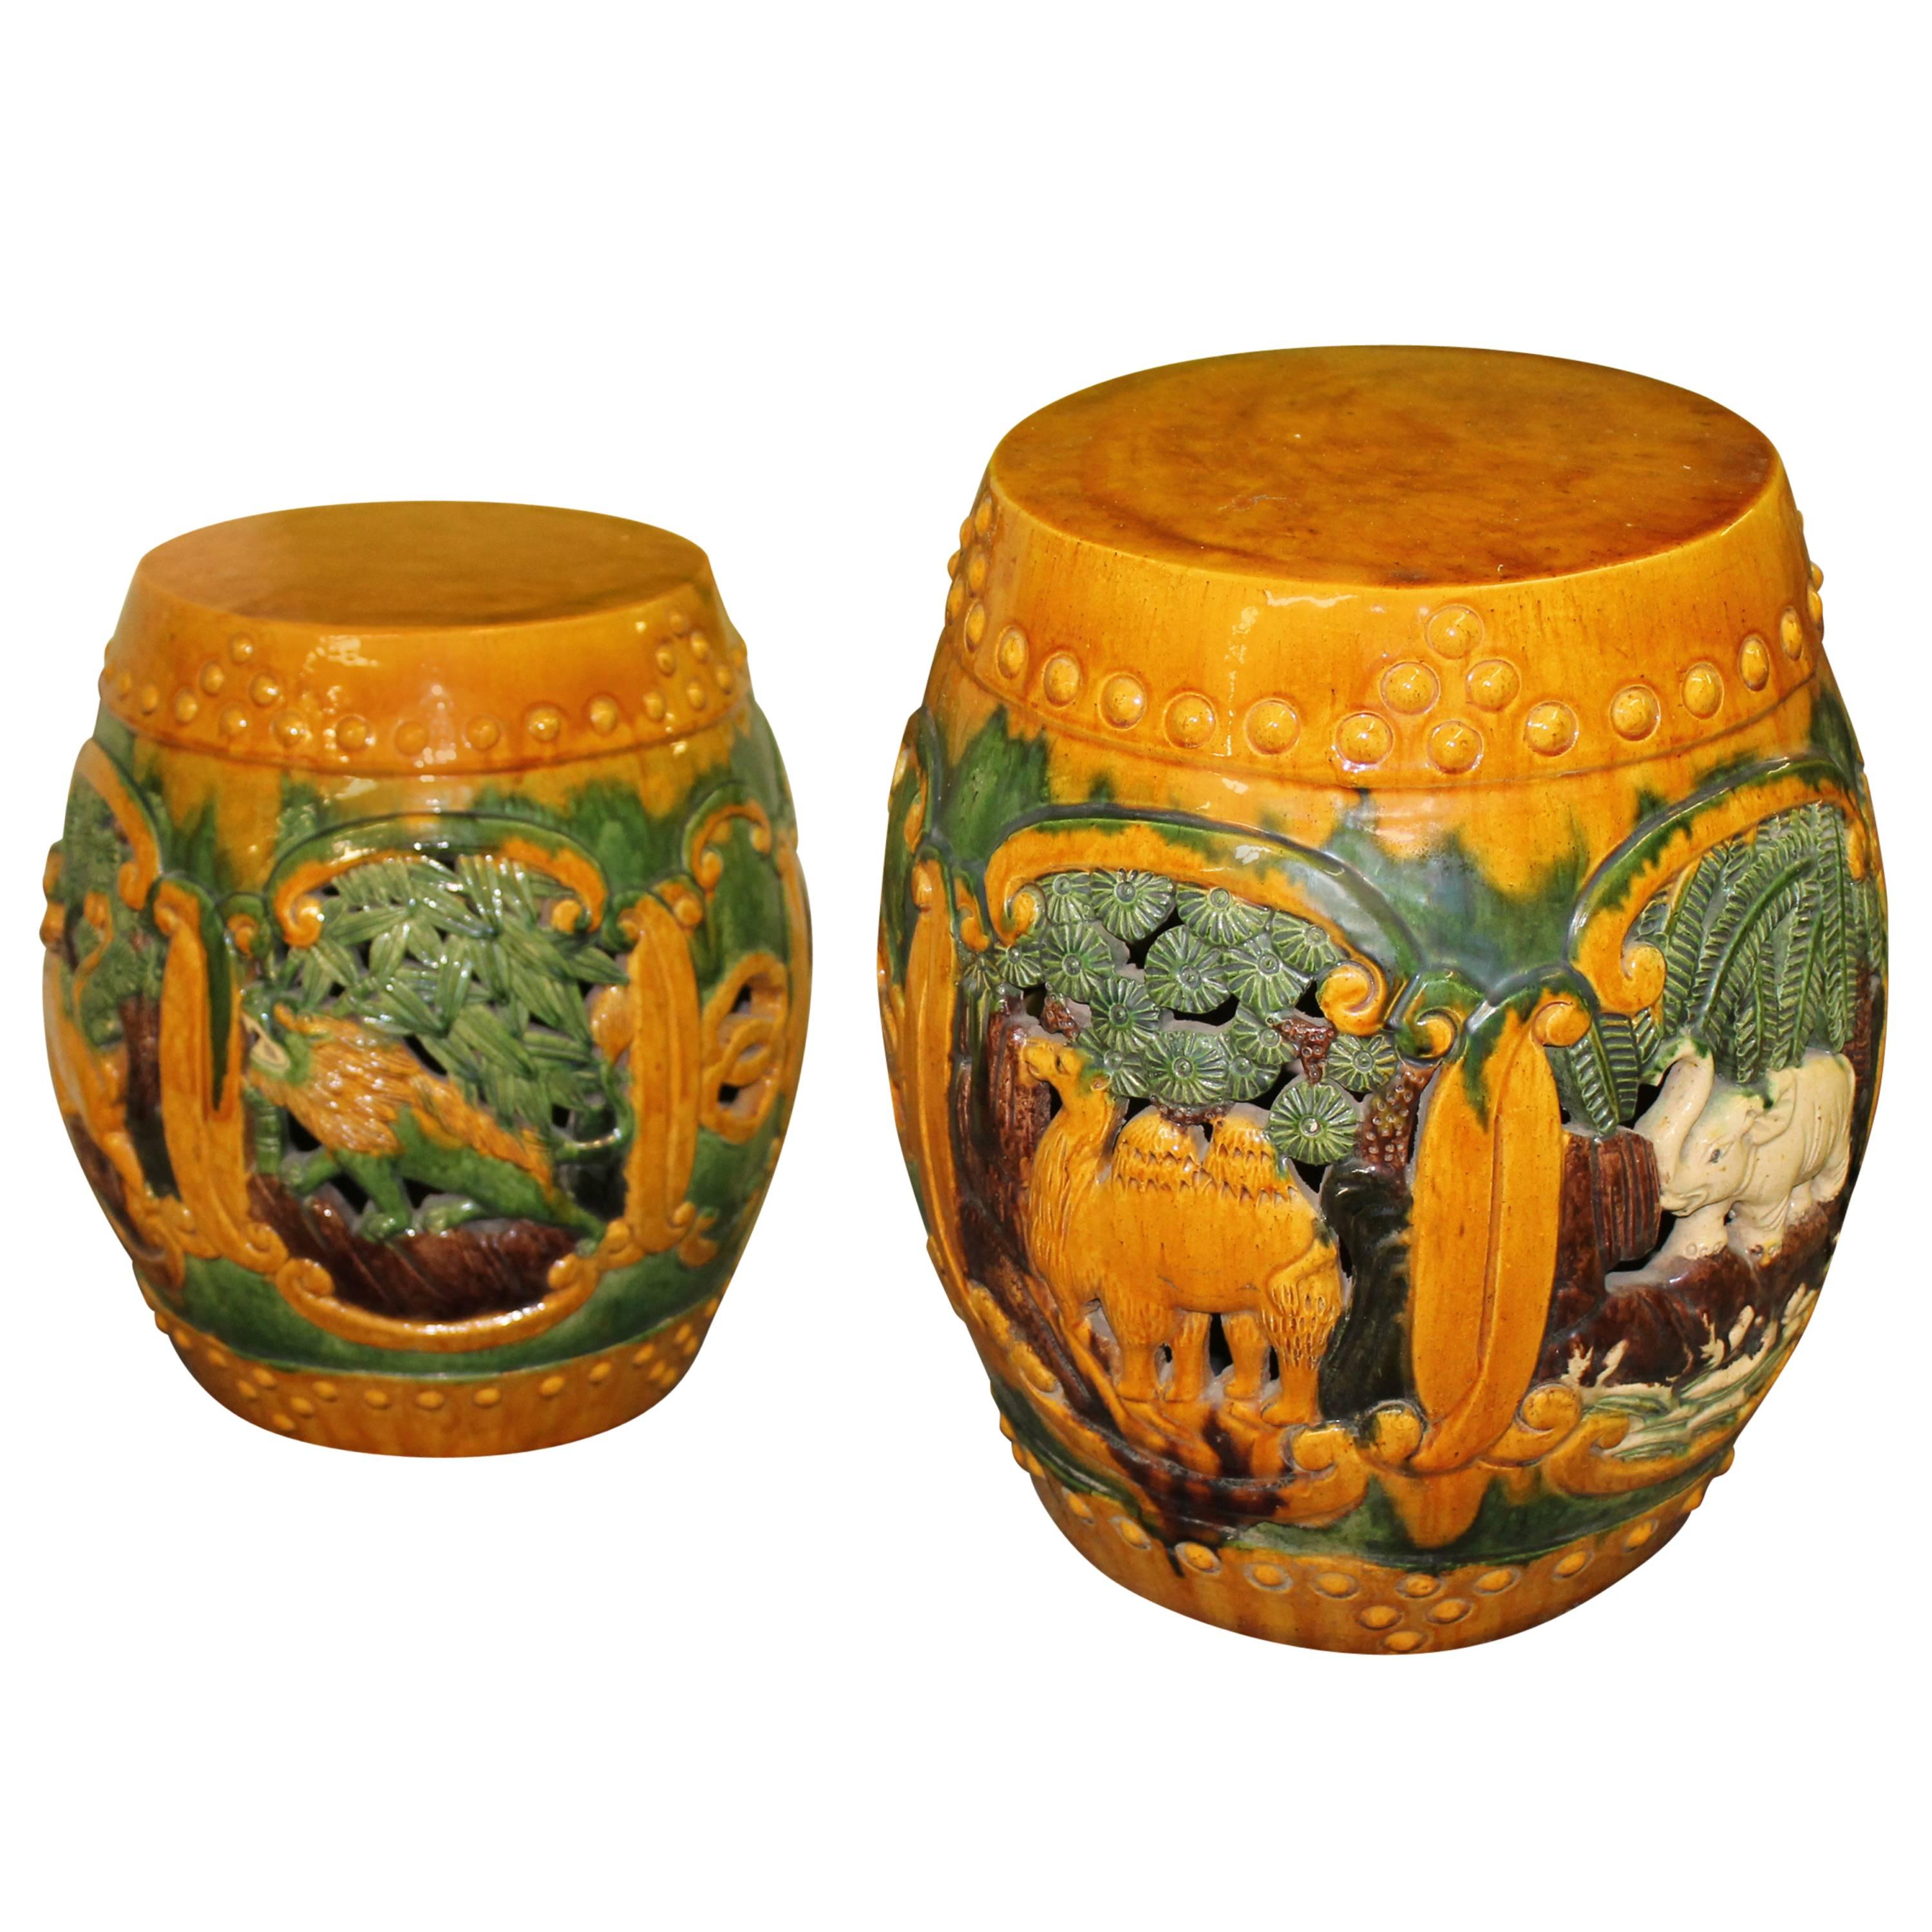  Vintage Pair of Ceramic Garden Drum Stools or Stands with Camels and Elephants